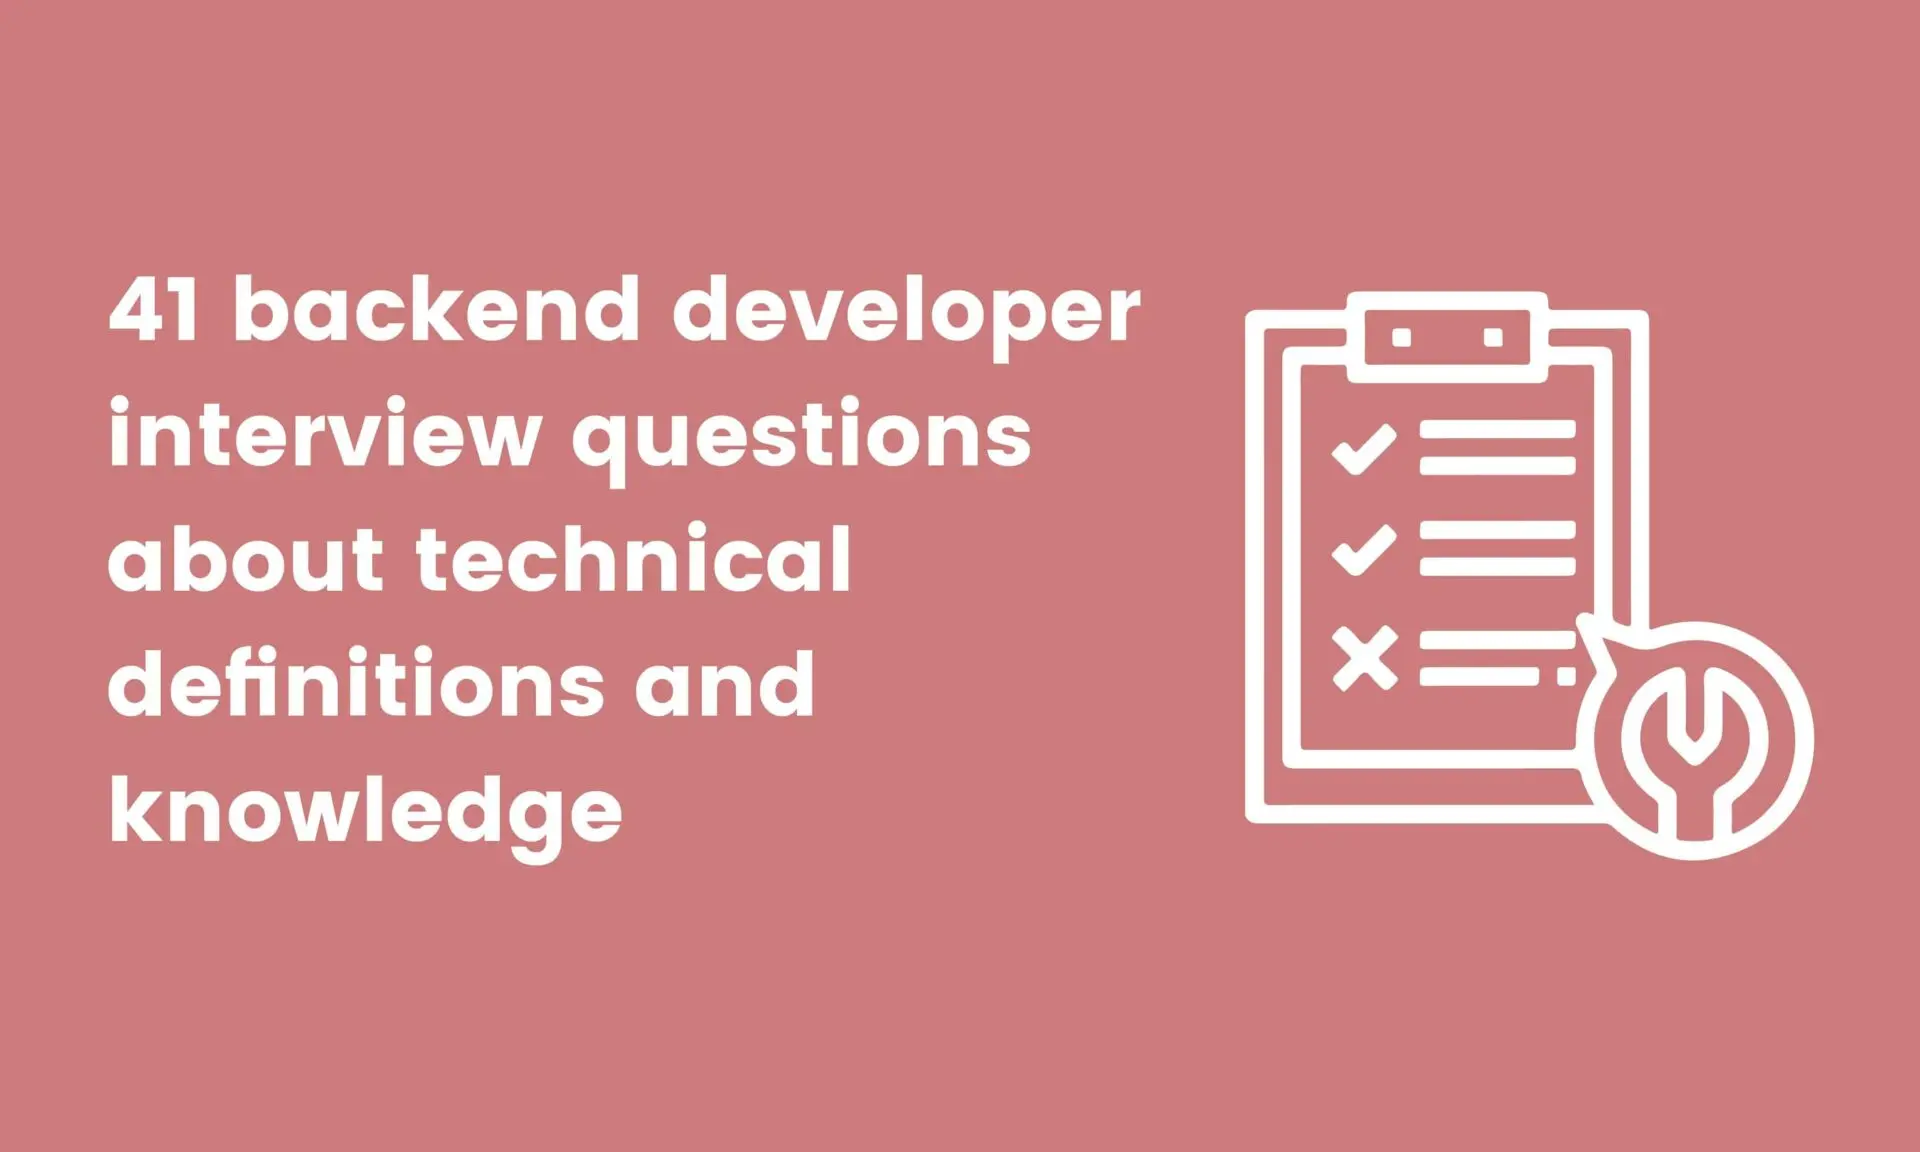 41 backend developer interview questions about technical definitions and knowledge